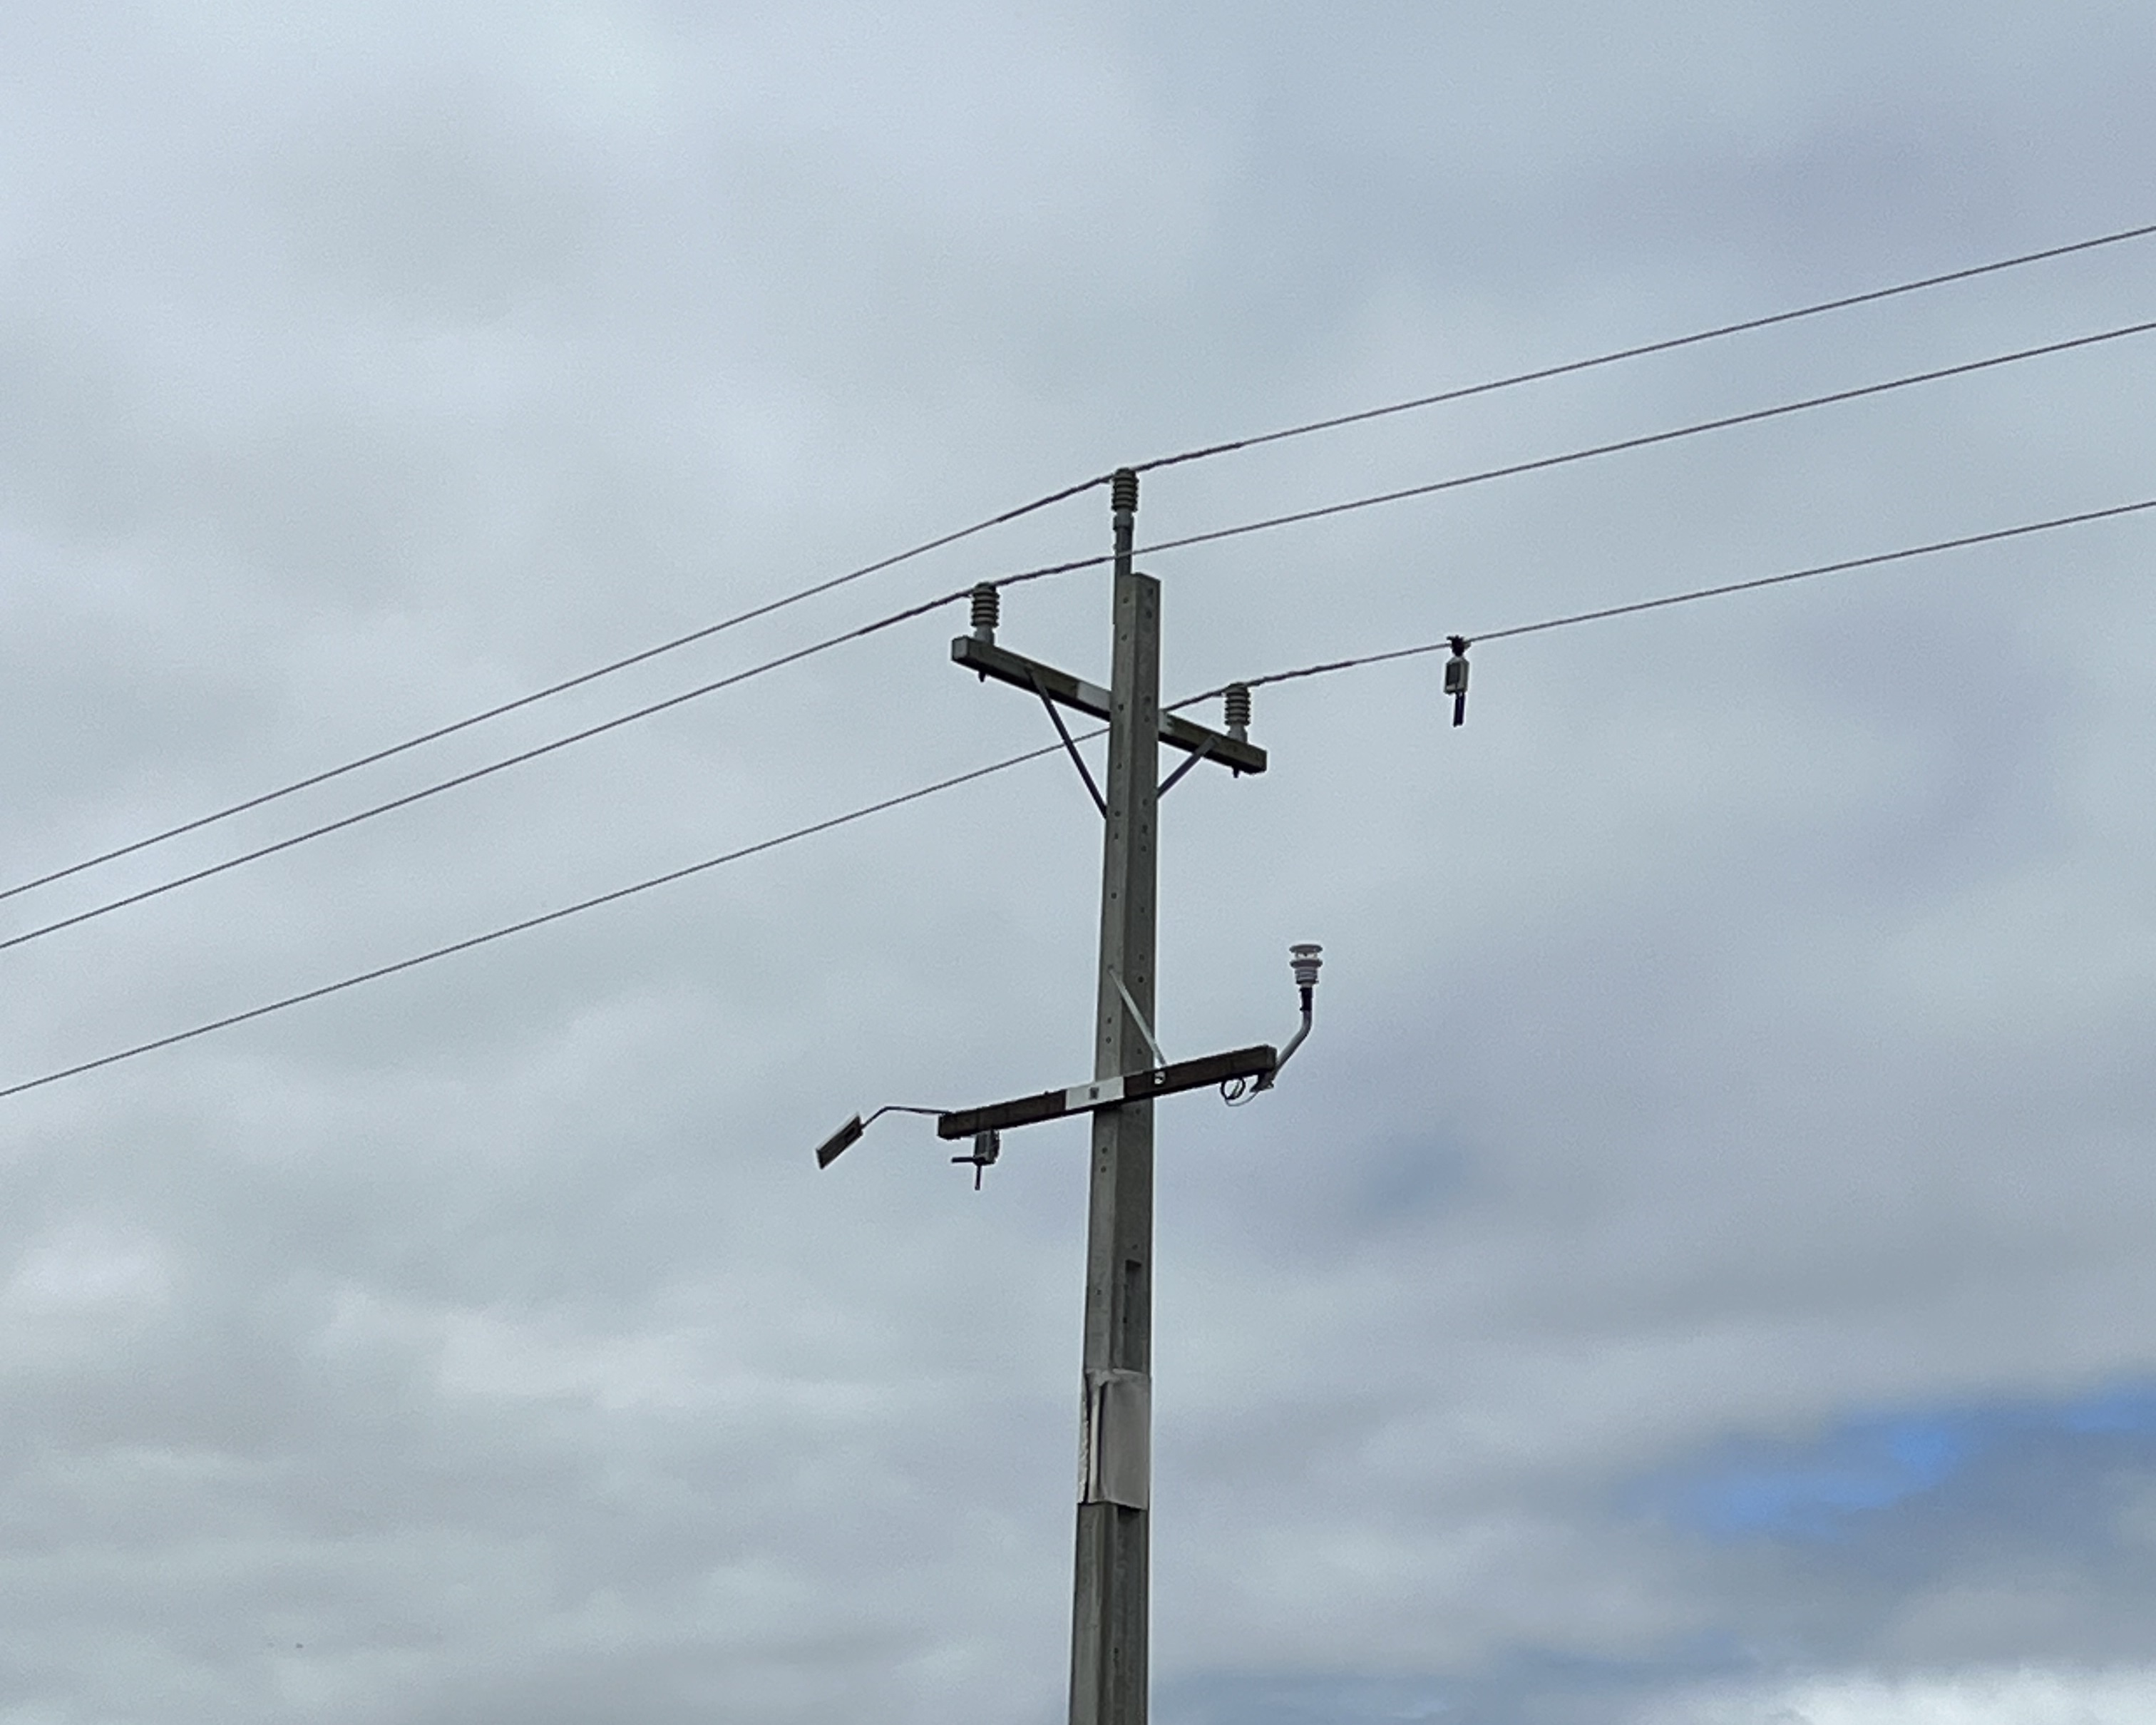 Power pole and lines with a small rectangular device hanging on one of the lines.